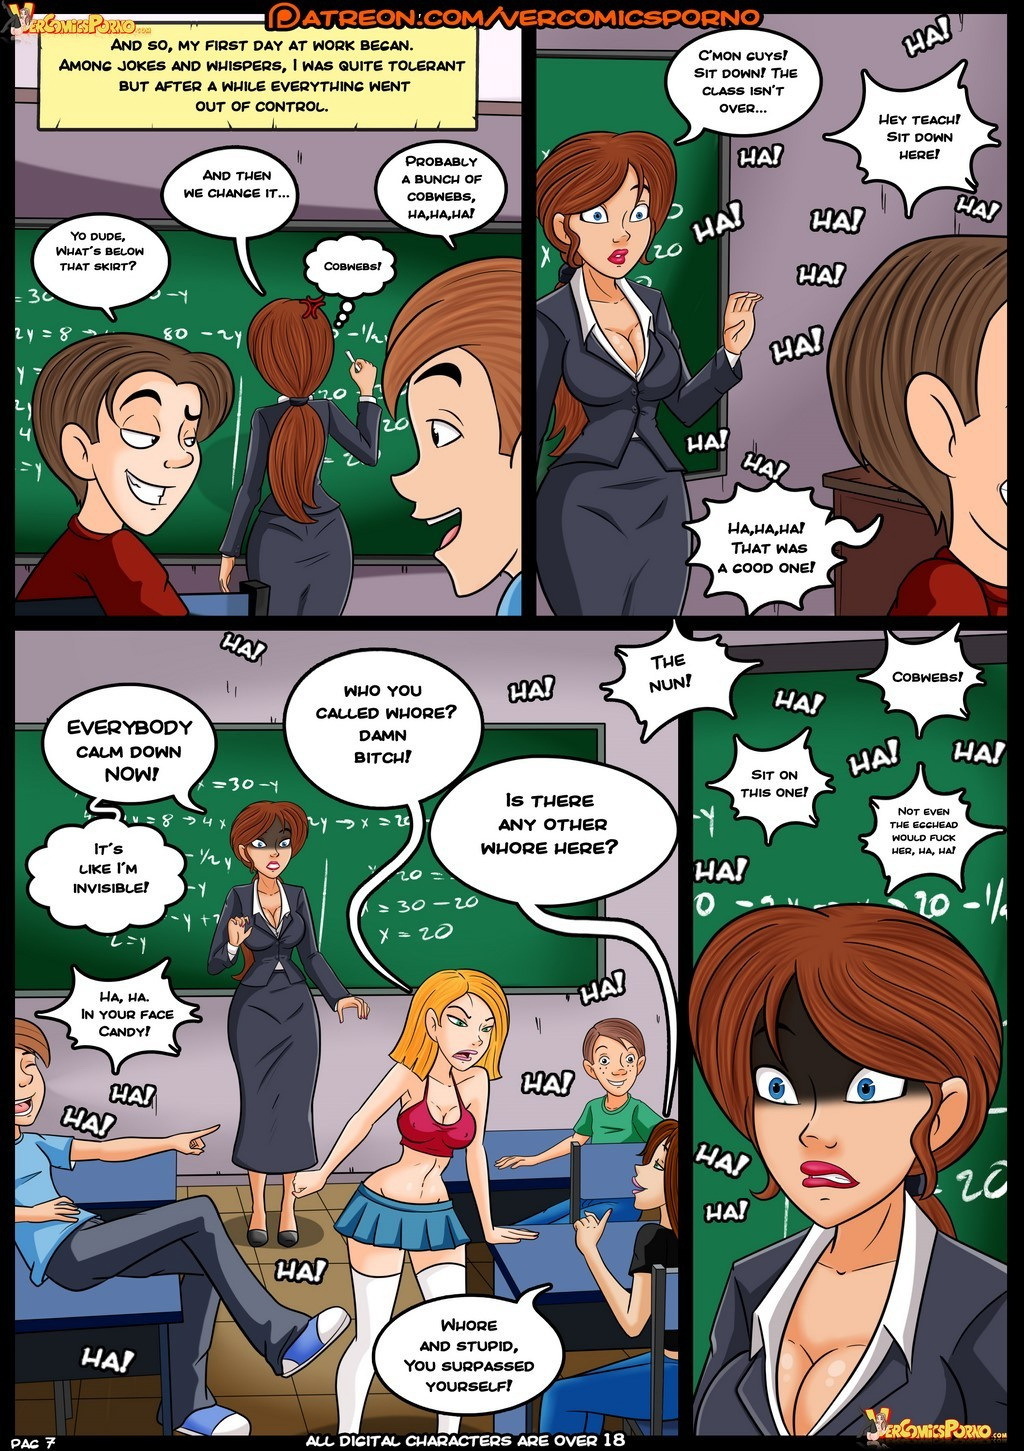 Valery Chronicles - Page 8